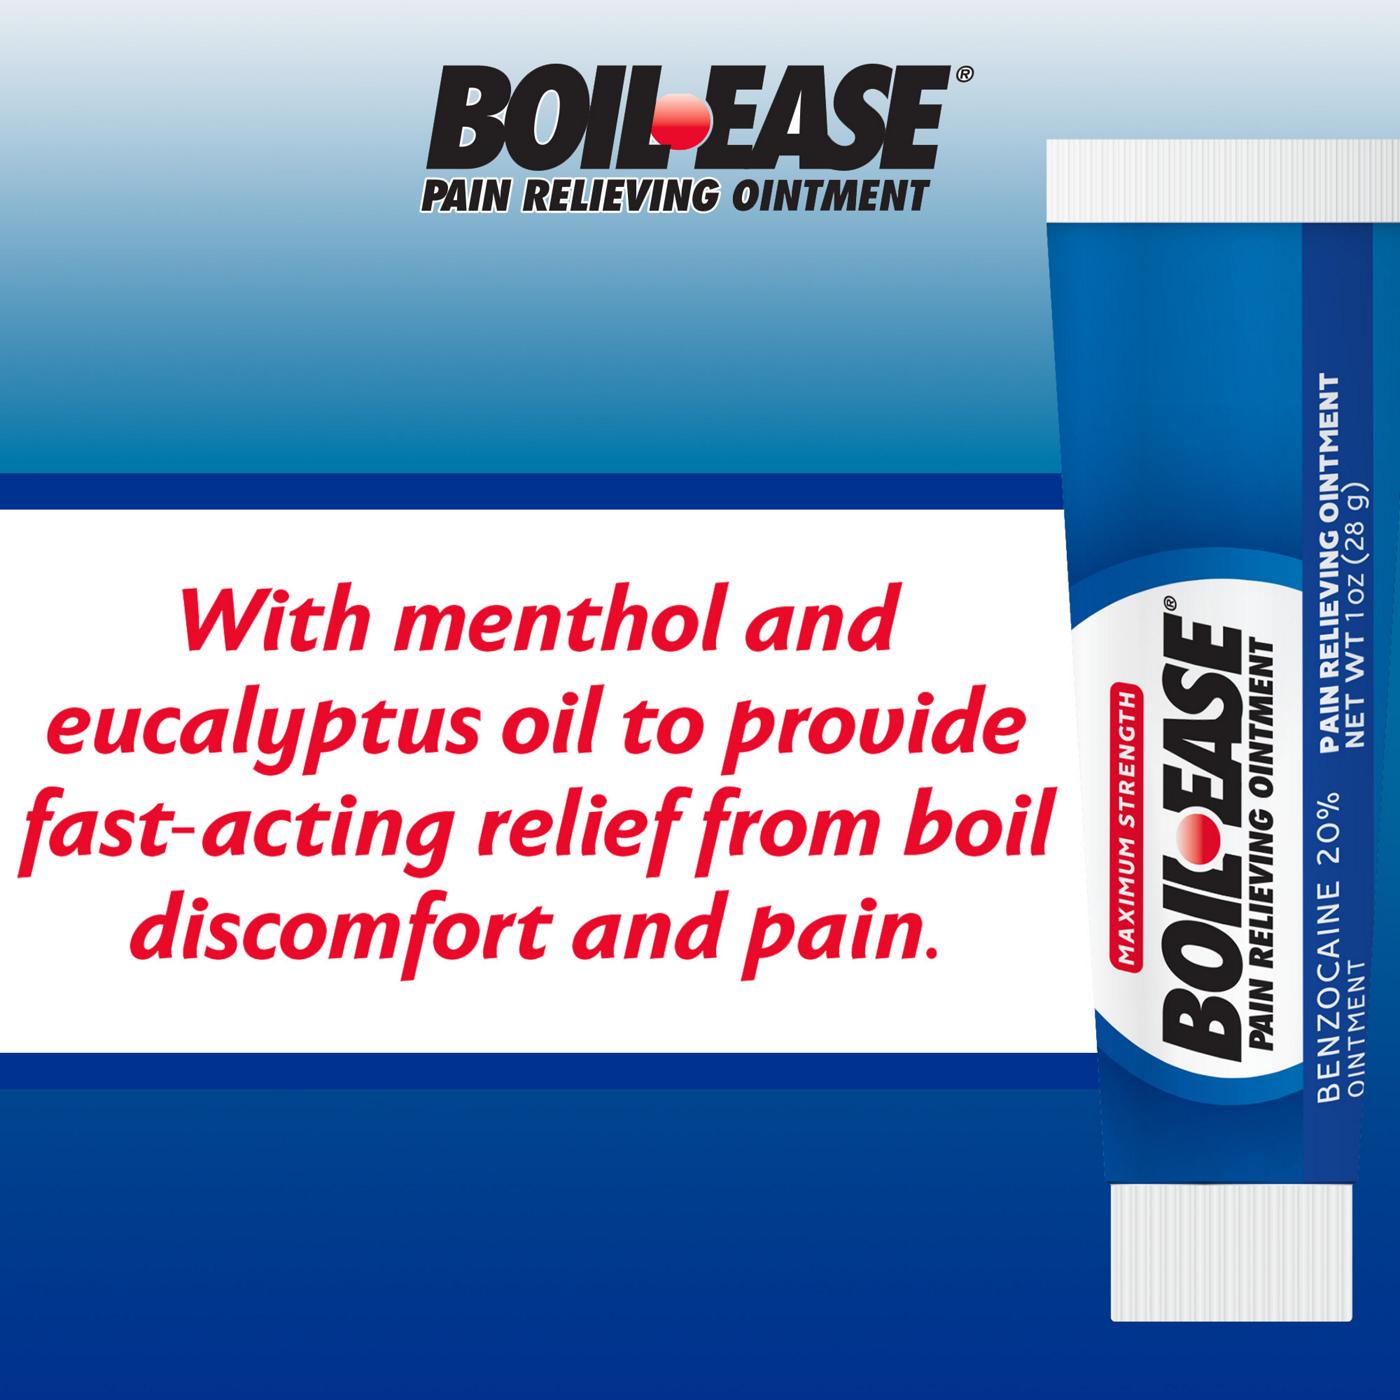 Boil-Ease Maximum Strength Pain Relieving Ointment; image 5 of 5